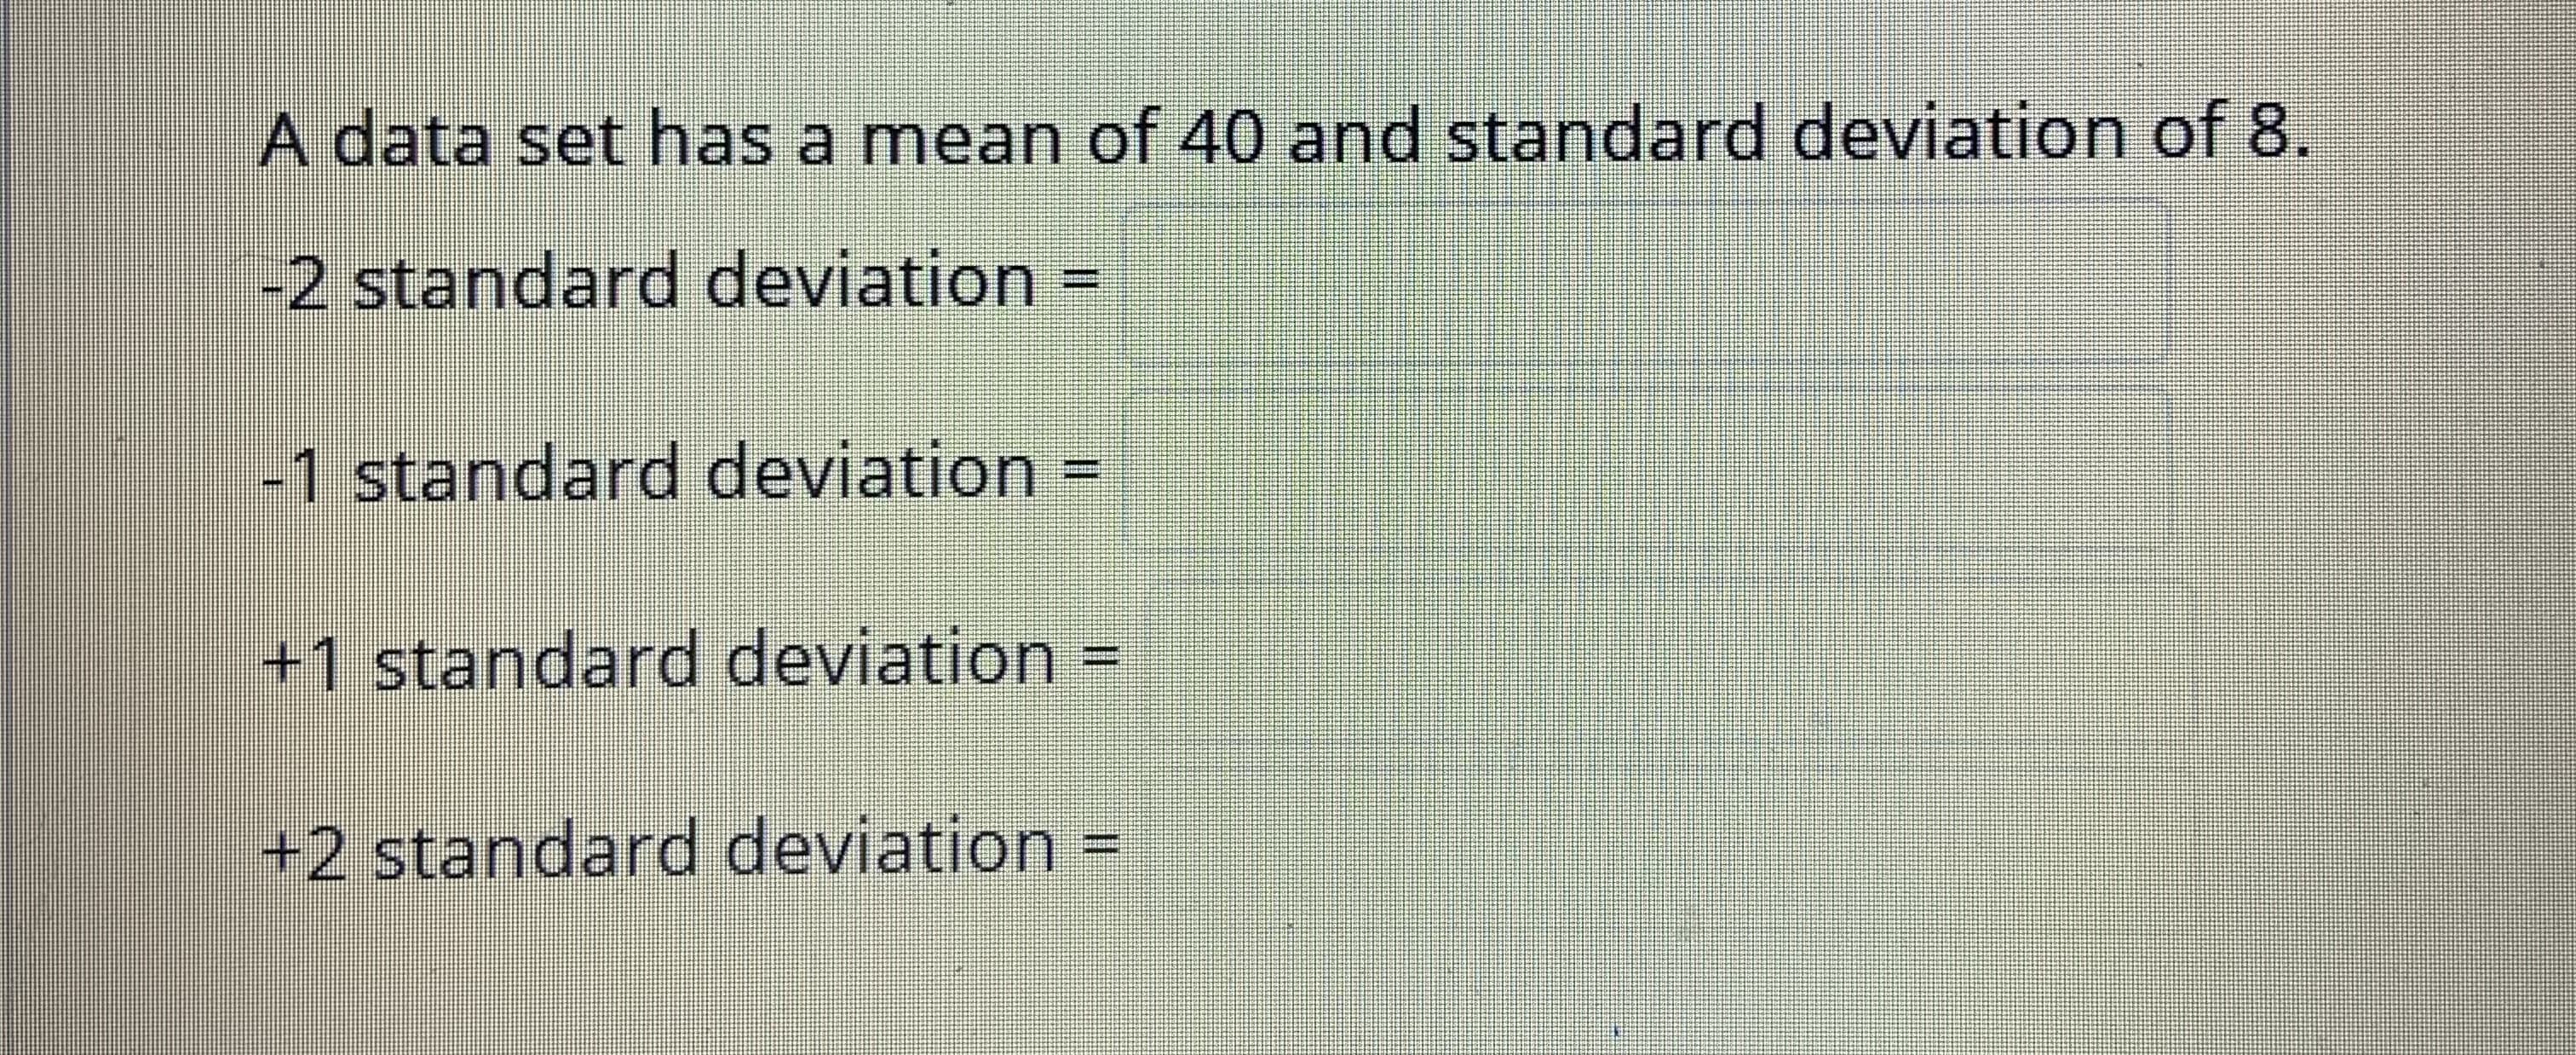 A data set has a mean of 40 and standard deviation of 8.
-2 standard deviation =
-1 standard deviation
+1 standard deviation =
+2 standard deviation =
